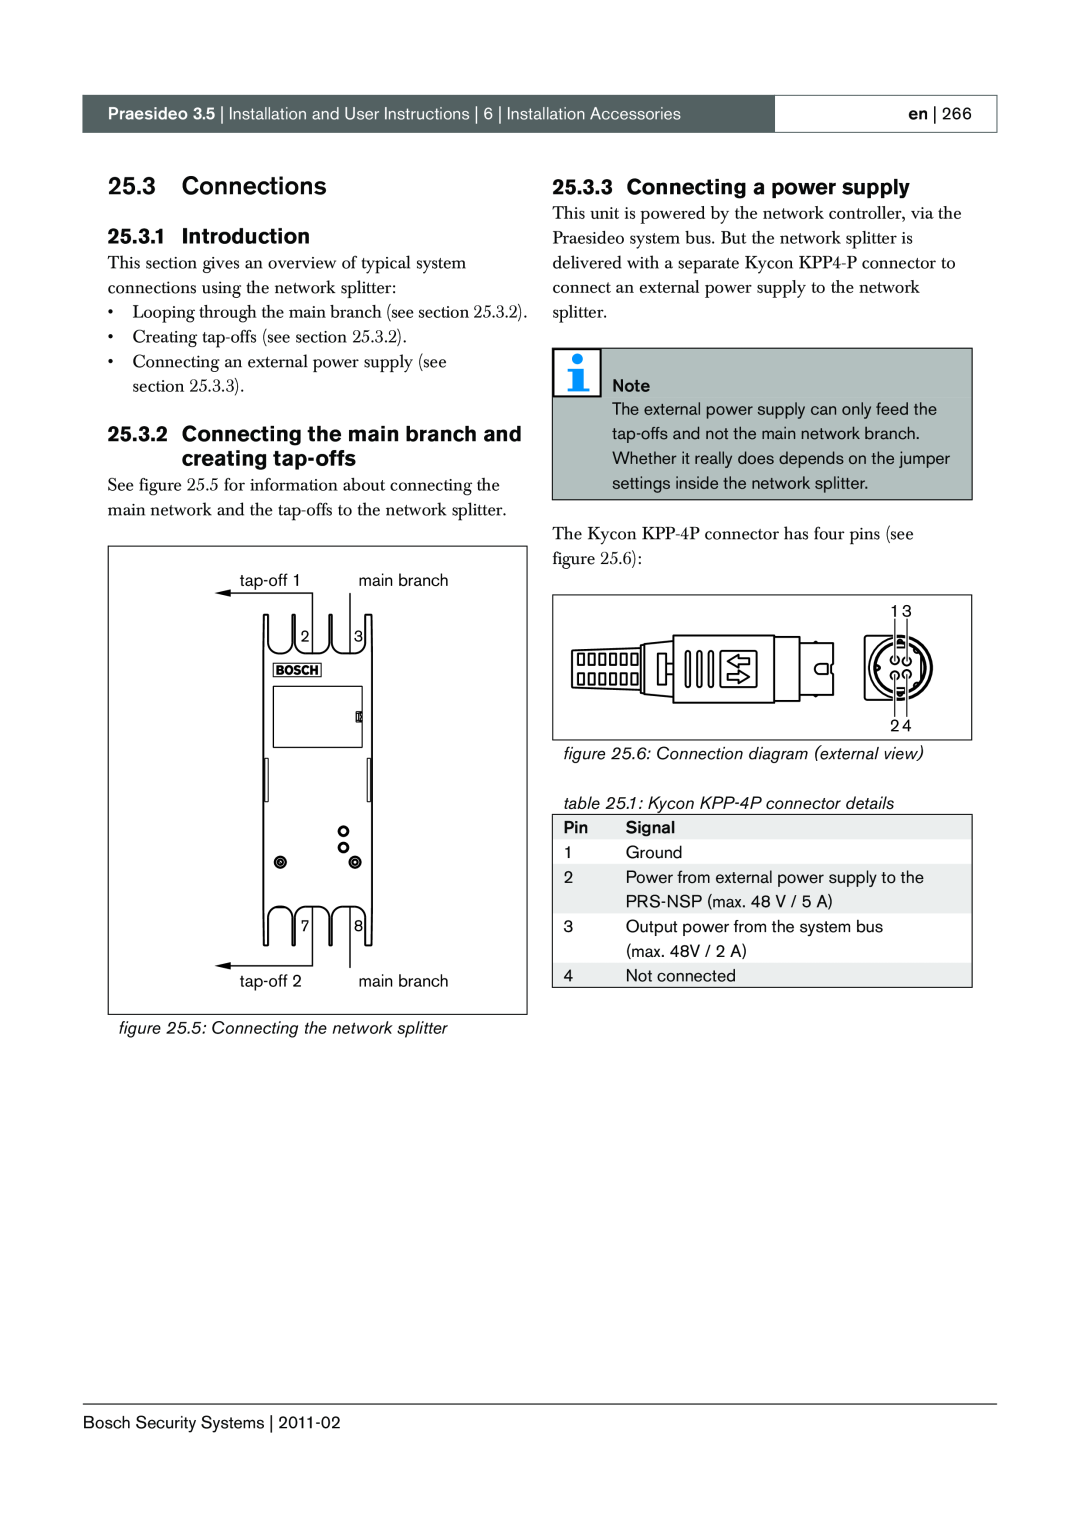 Bosch Appliances 3.5 manual 25.3Connections, Introduction, Connecting a power supply, 5: Connecting the network splitter 